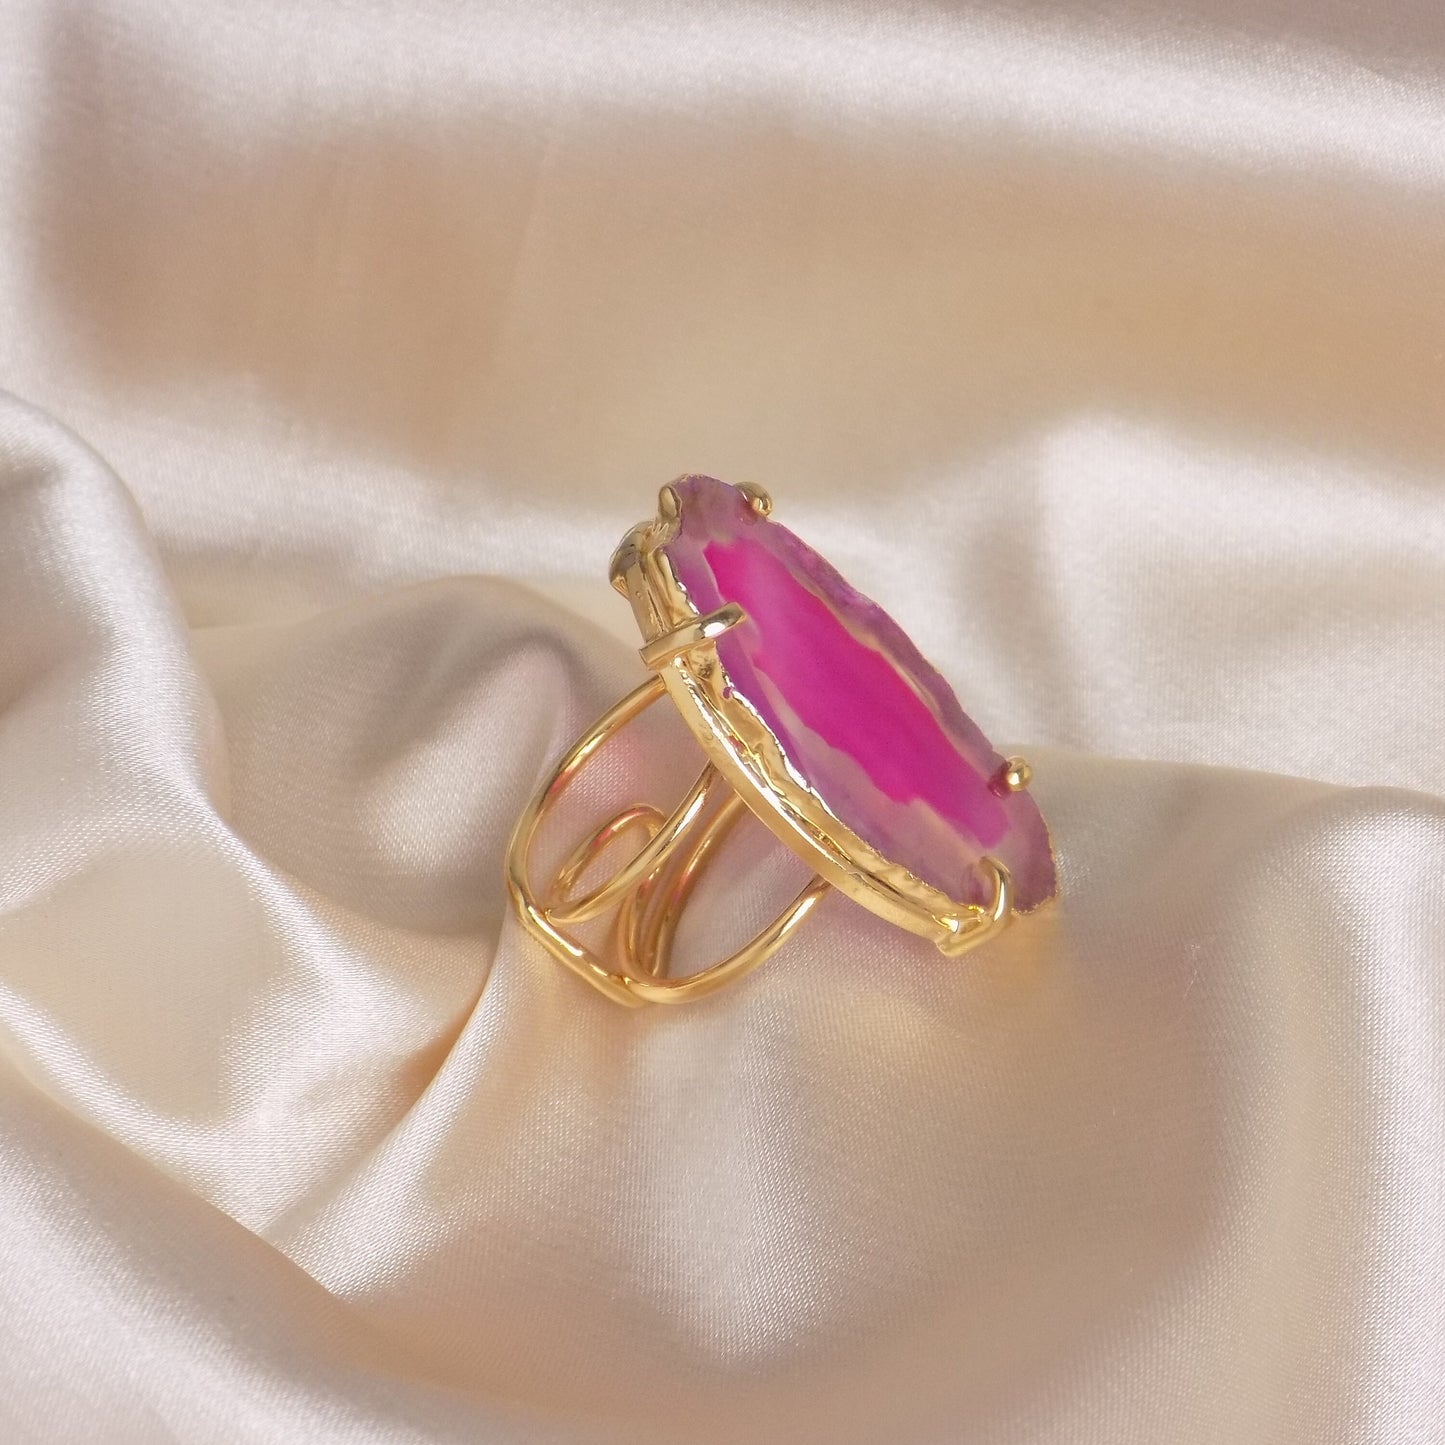 Boho Pink Agate Ring Gold Plated Adjustable - Elegant Statement Jewelry